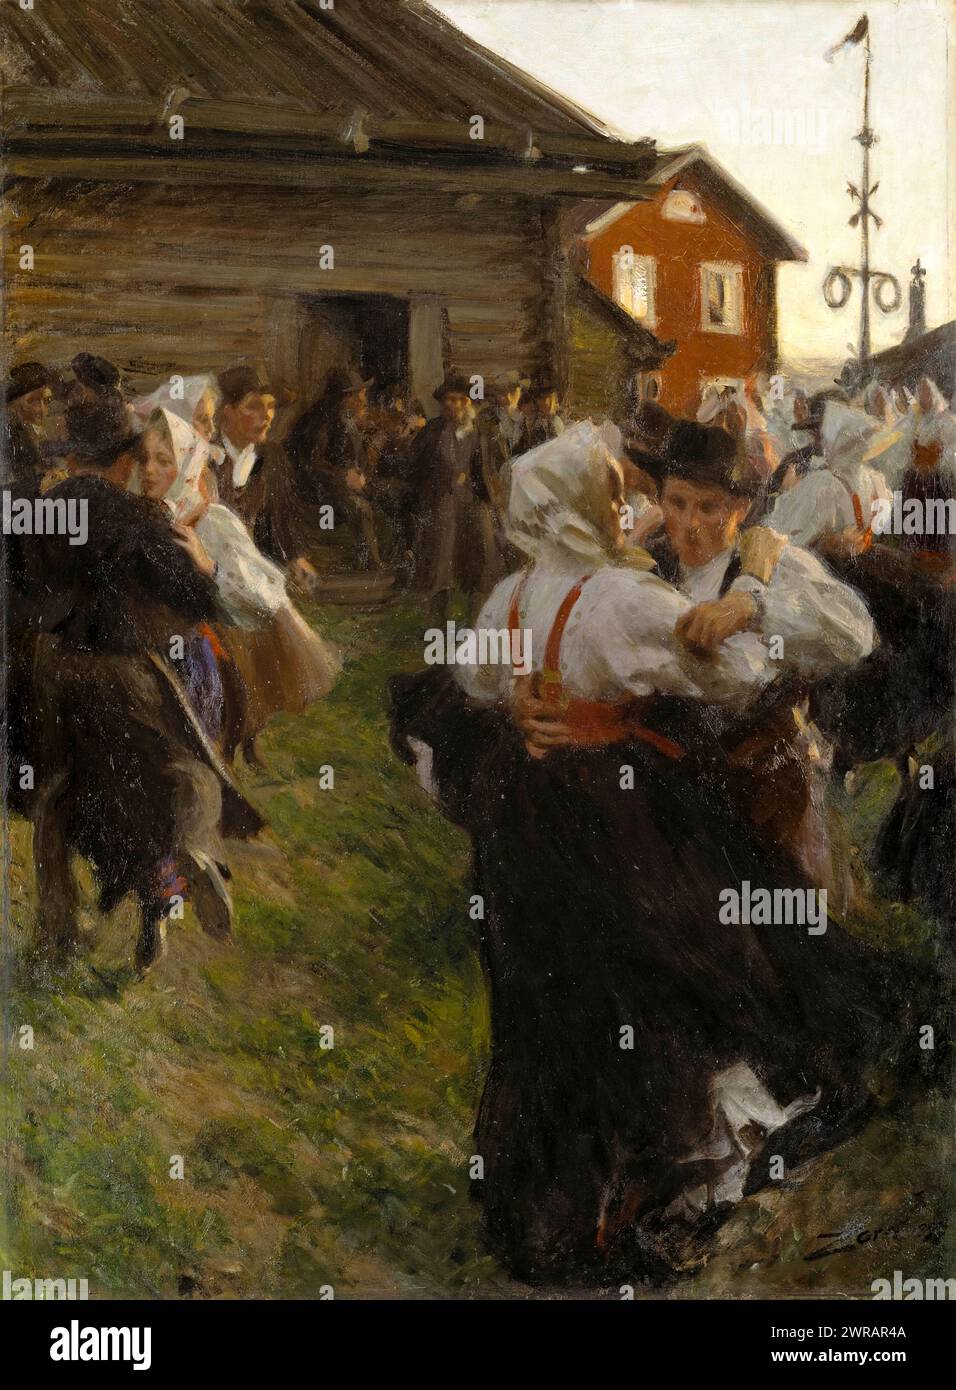 Midsummer Dance by Swedish artist Anders Zorn (1860-1920) painted in 1897.A classic of Swedish art history showing traditional folk dancing in the Dalarna countryside in the extended summer evening light. Credit: Nationalmuseum, Sweden / Universal Art Archive Stock Photo